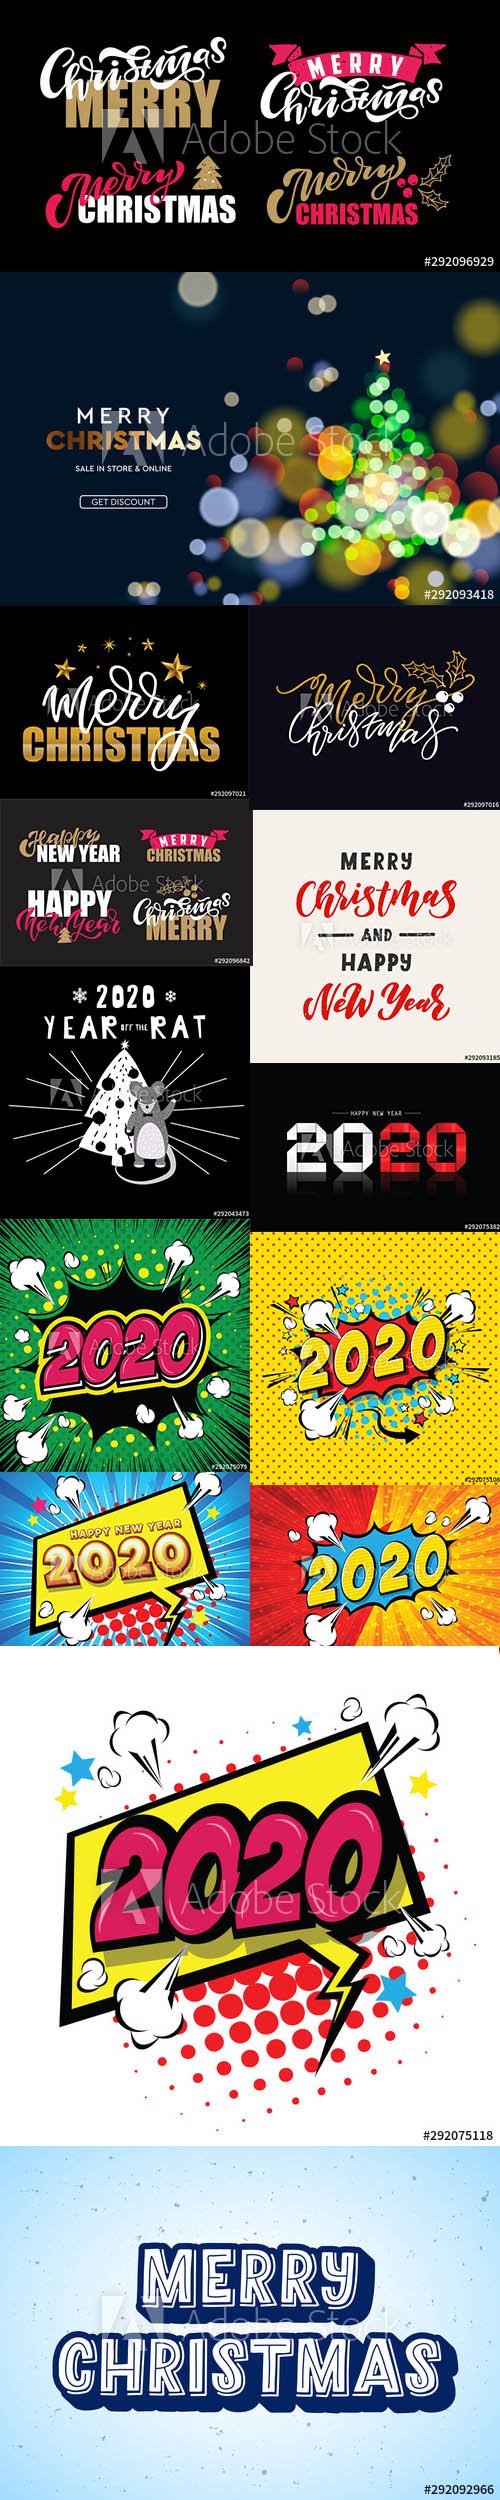 Merry Christmas and Happy New Year 2020 Illustrations Vector Set 7